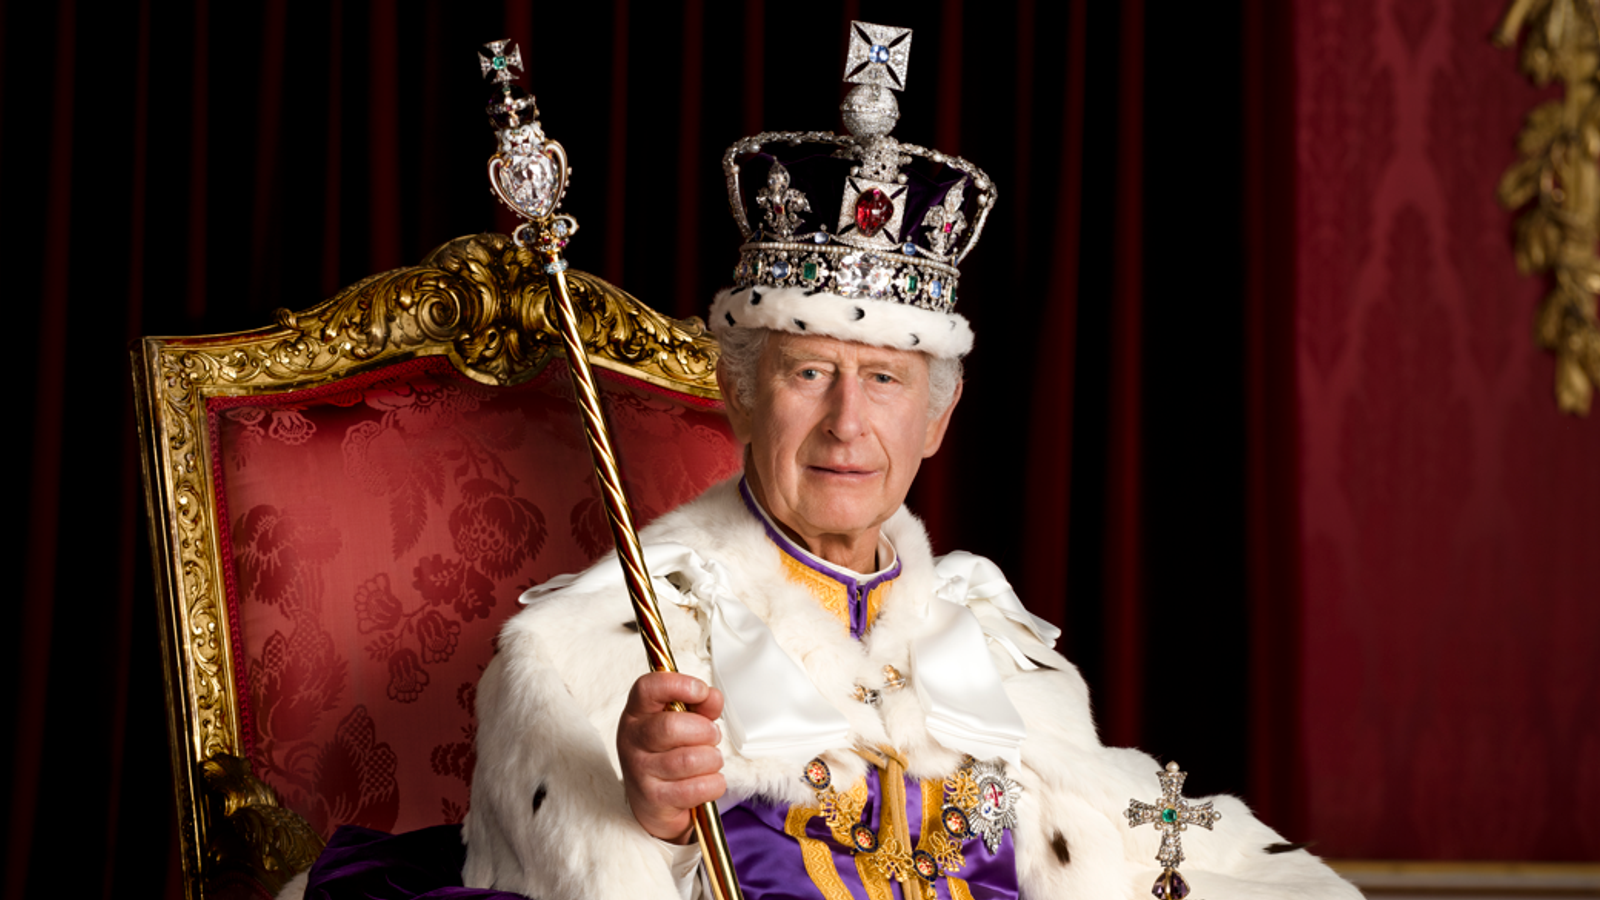 Nation's support is 'greatest coronation gift,' says King